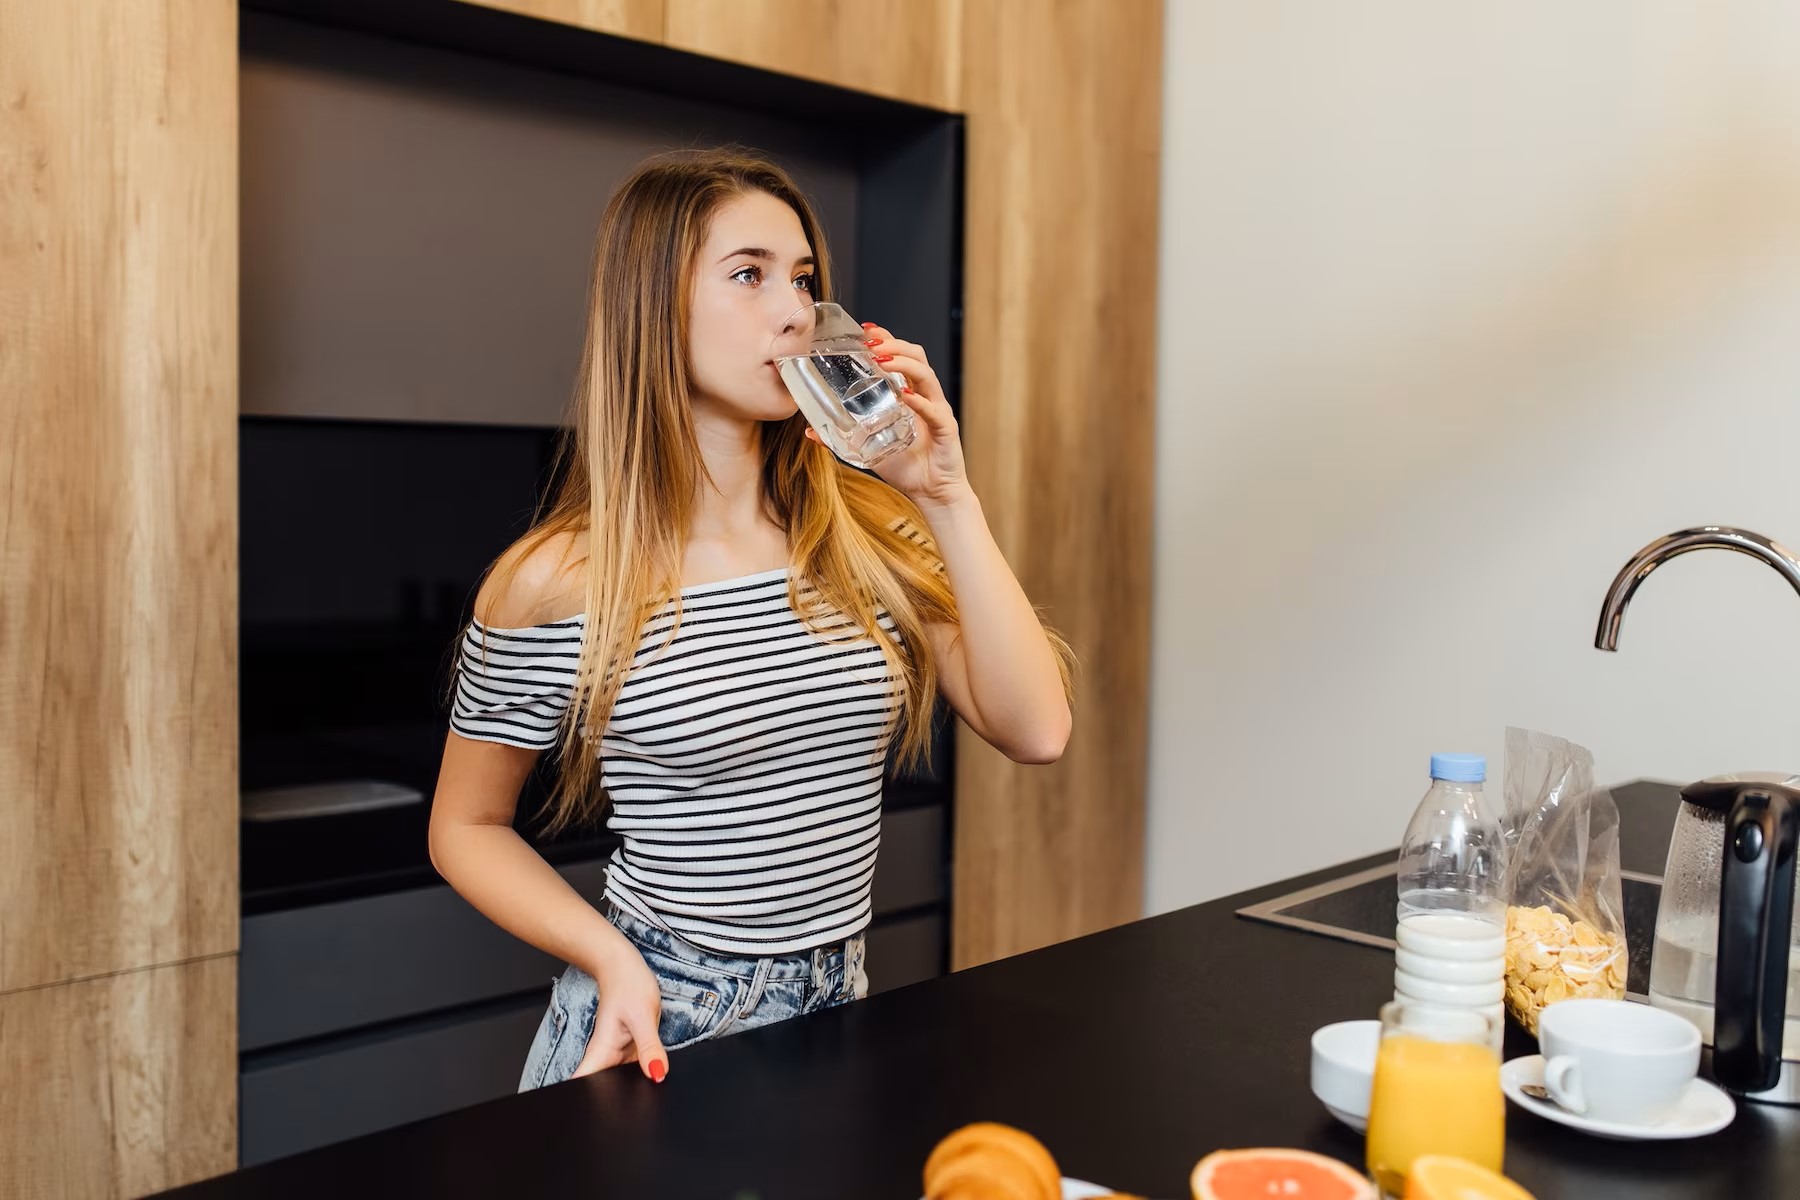 beautiful-young-blonde-woman-drinking-water-in-kitchen-with-healthy-food-on-table_496169-1128.jpg